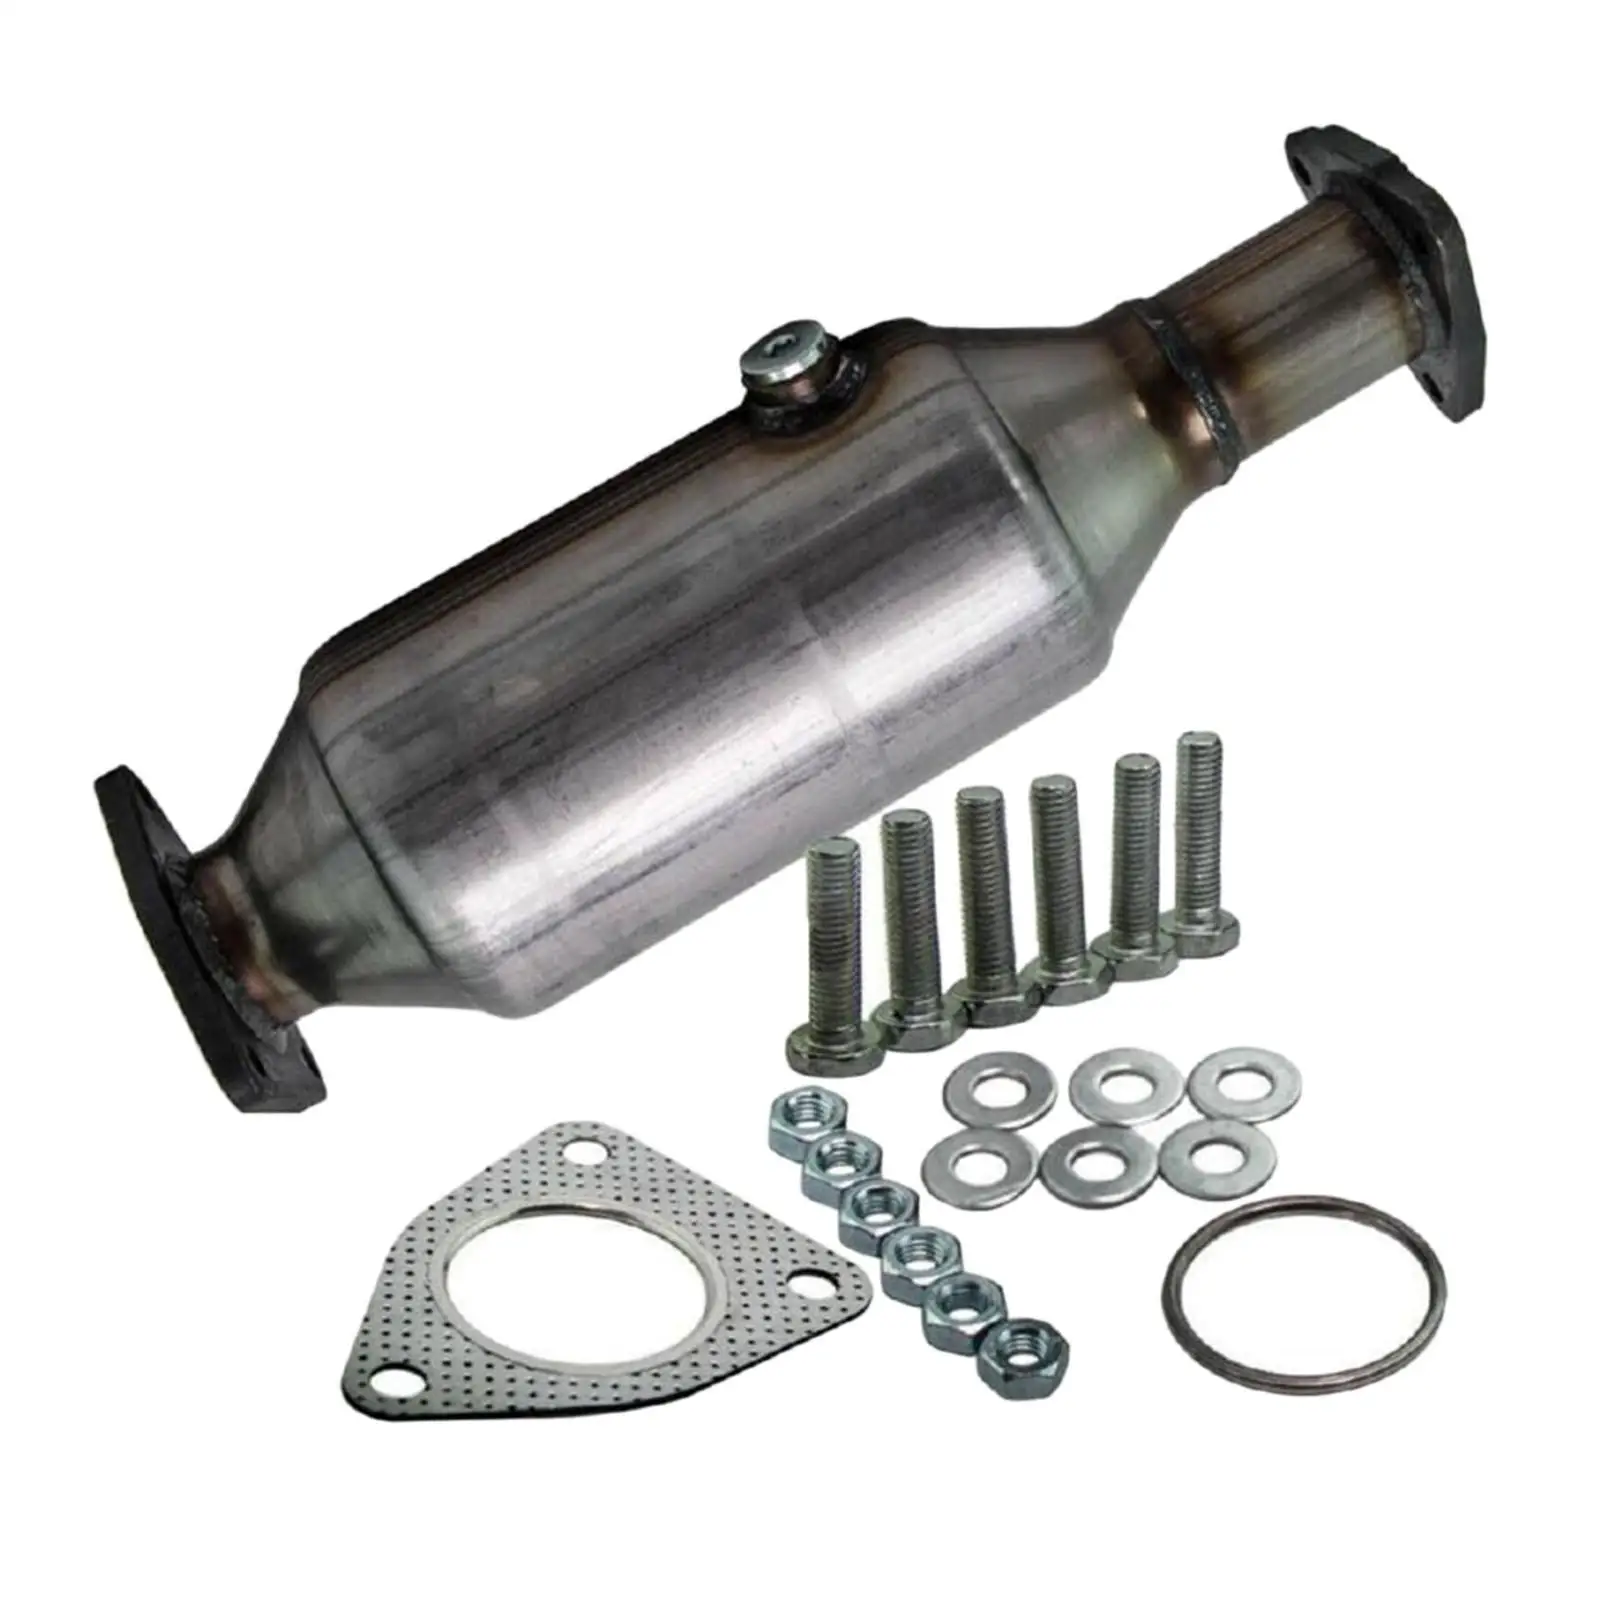 Exhaust  Compatible with 1998-2002  Accord 2.3L F23A1 / F23A5 I4 Engine Flange Design